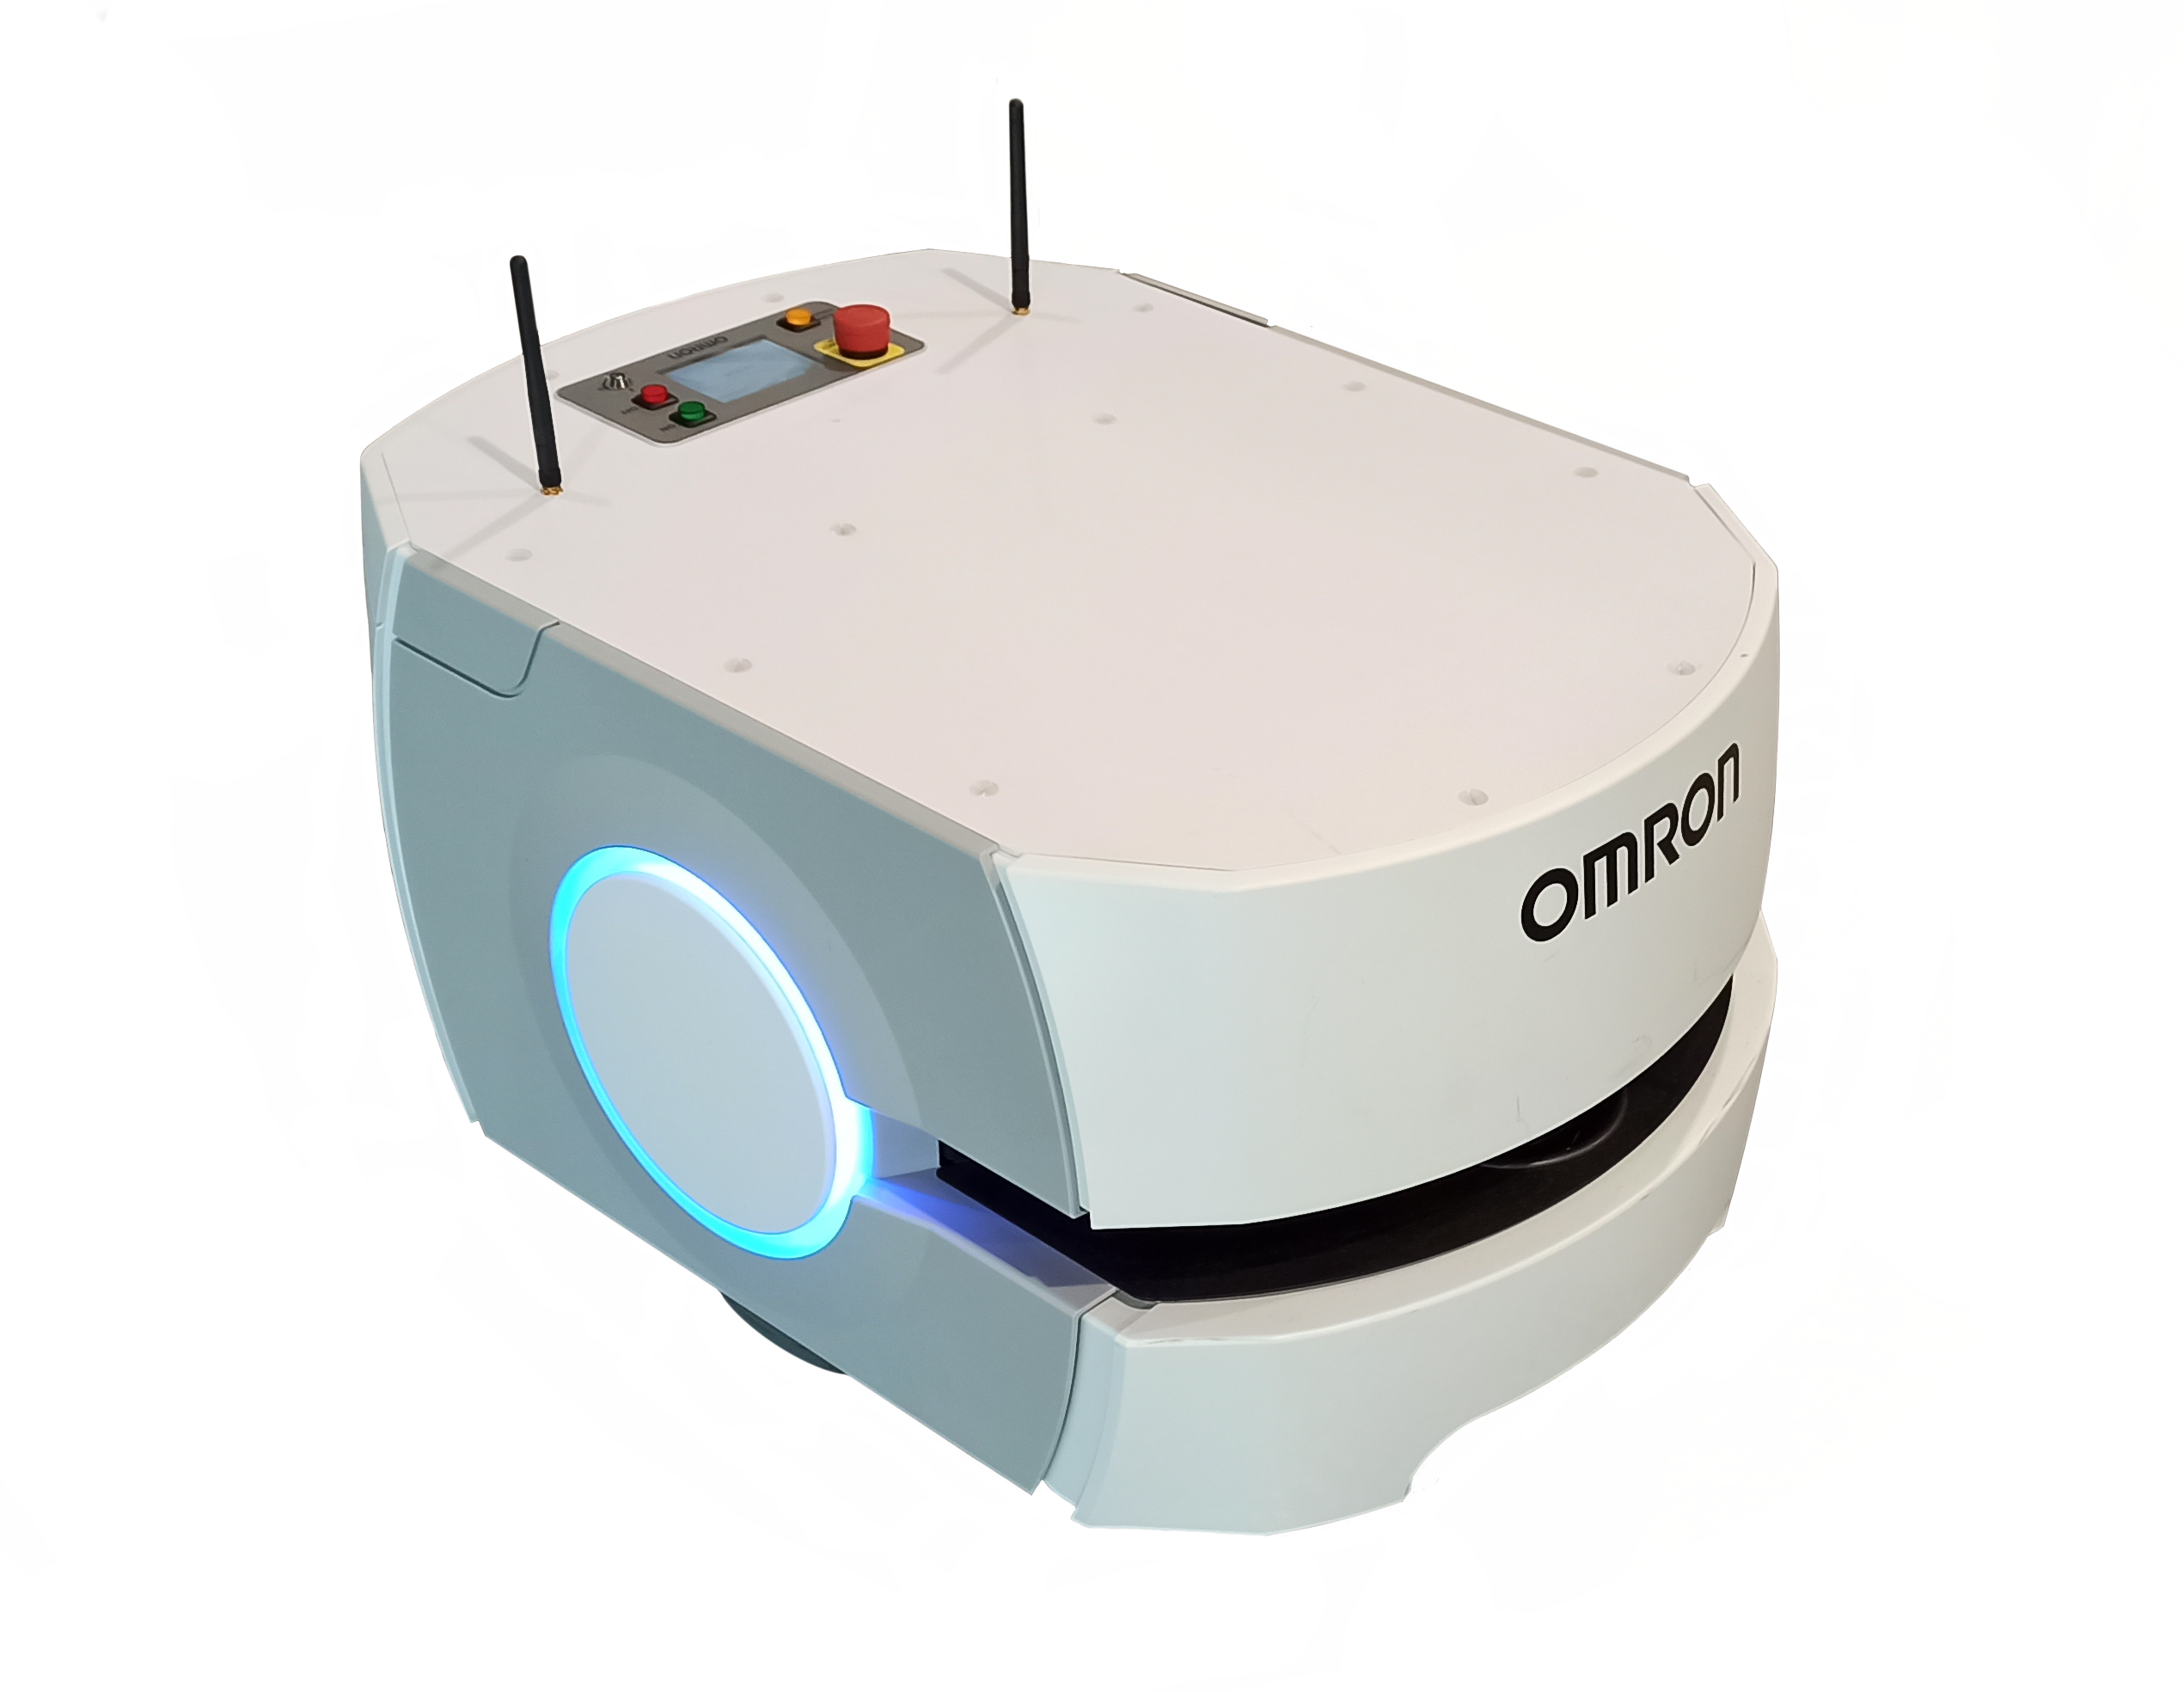 File:Omron LD Robot.png - Wikimedia Commons